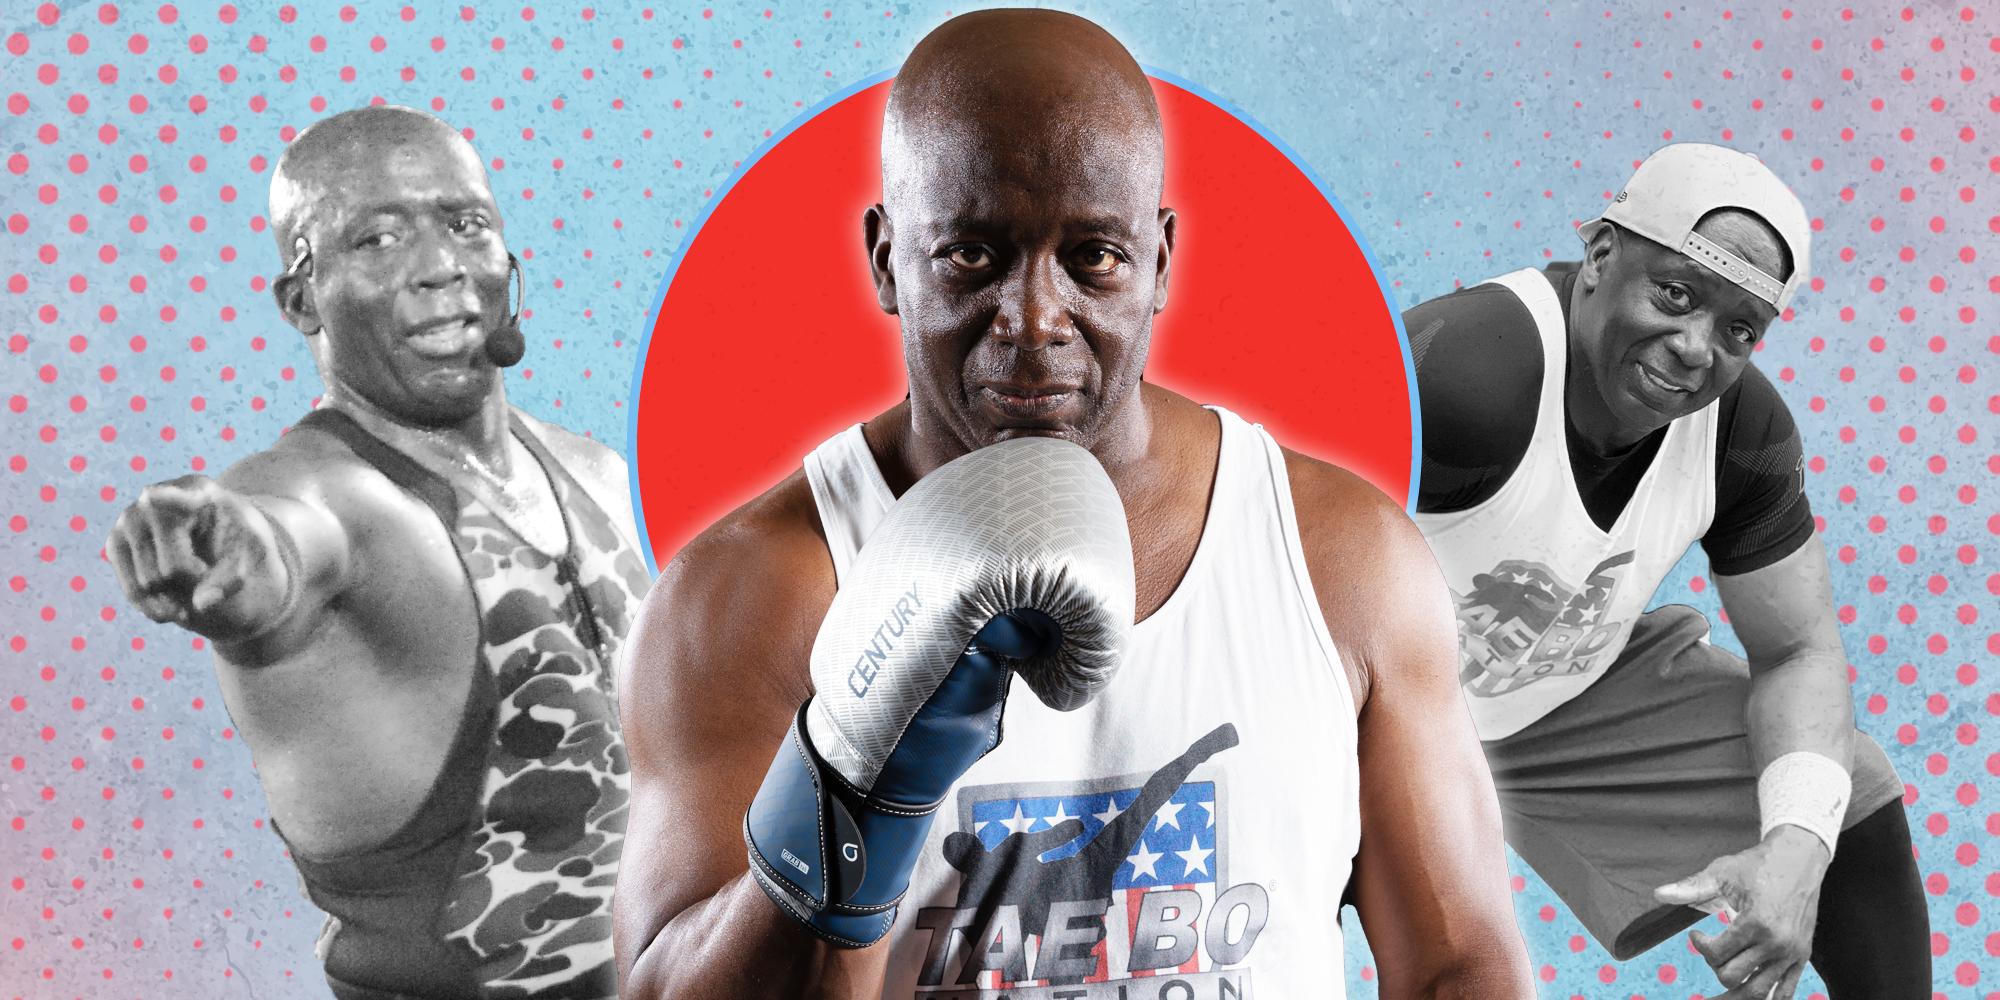 Billy Blanks on How Tae Bo Made a YouTube Comeback During Covid pic